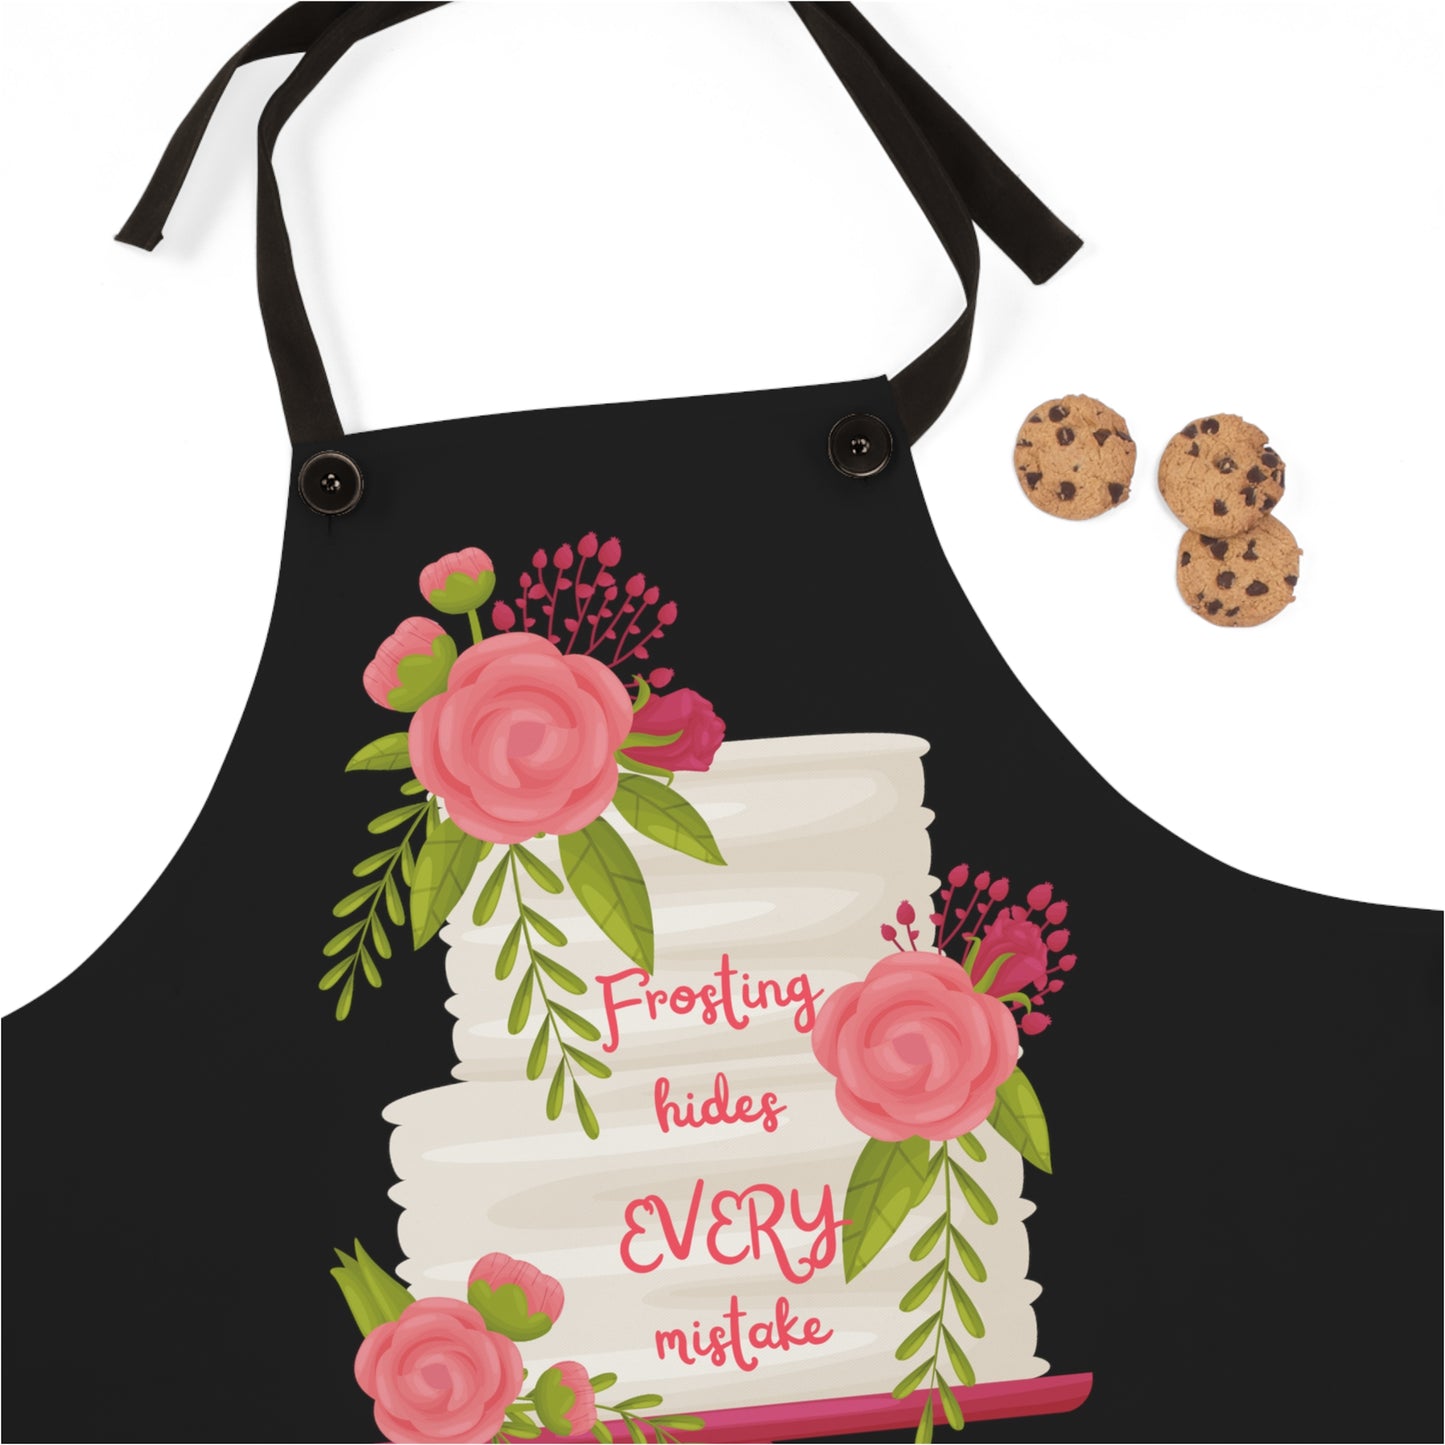 Frosting Hides Every Mistake Apron Black